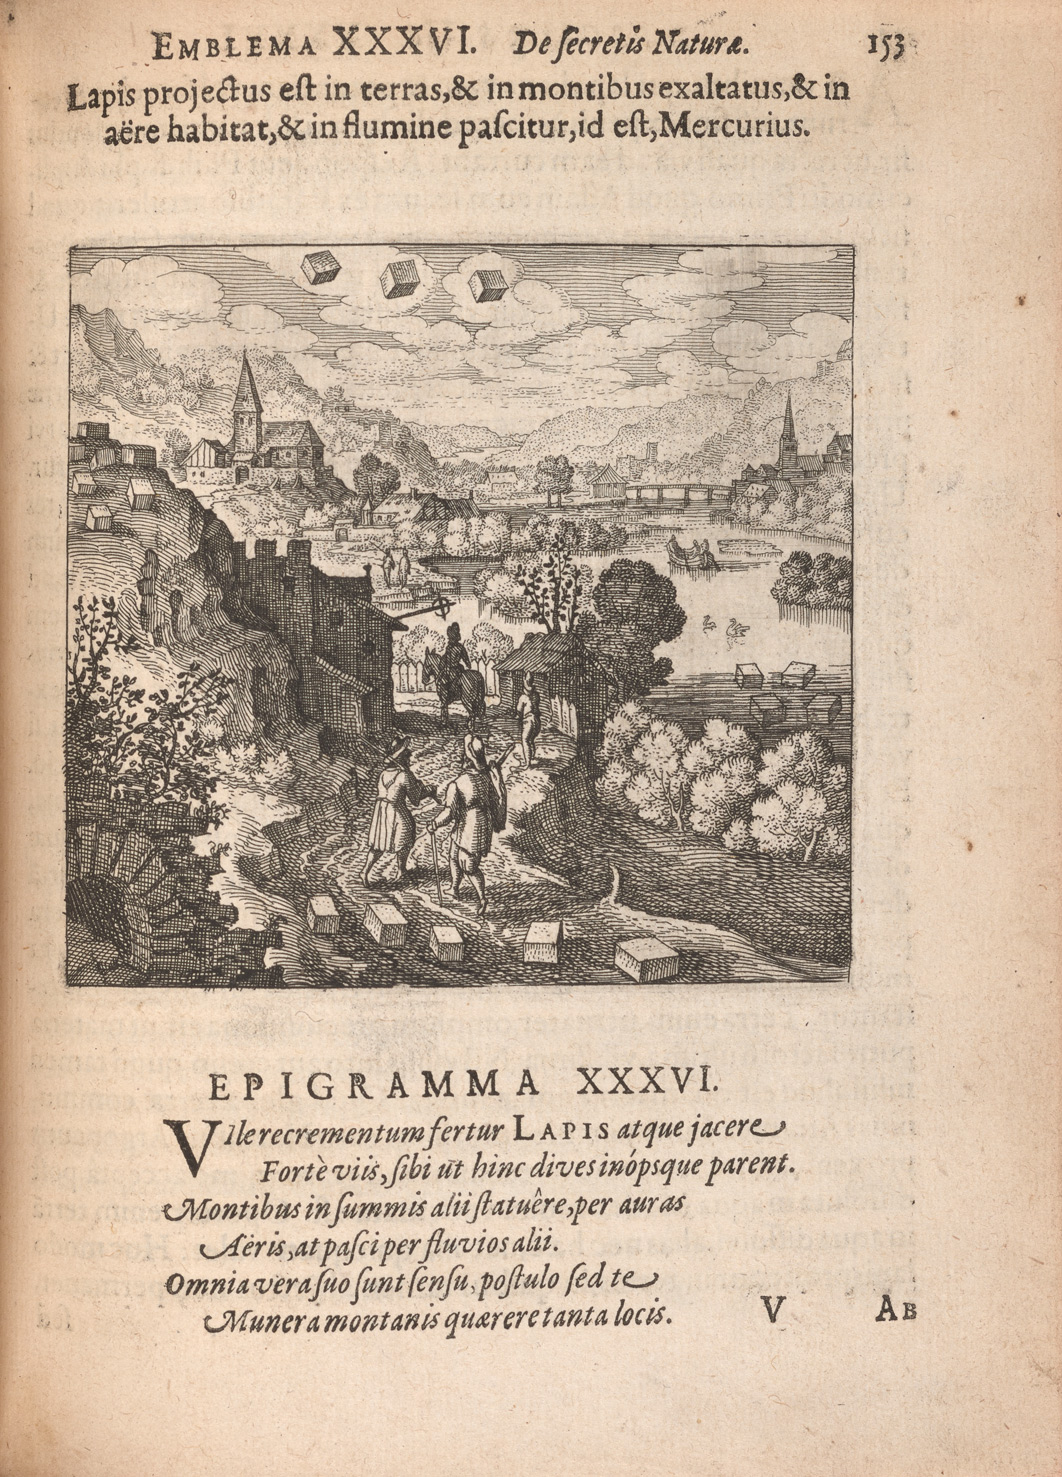 The second page of emblem 36 of Atalanta fugiens, which shows a motto and epigram in Latin, and an image. The image shows two men in early modern clothing walking on a path through a town with another man walking ahead of them and another one riding a horse. There is a river, church, and town in the background. There are three cubes floating in the air, five cubes behind the two men, and four cubes in the river.